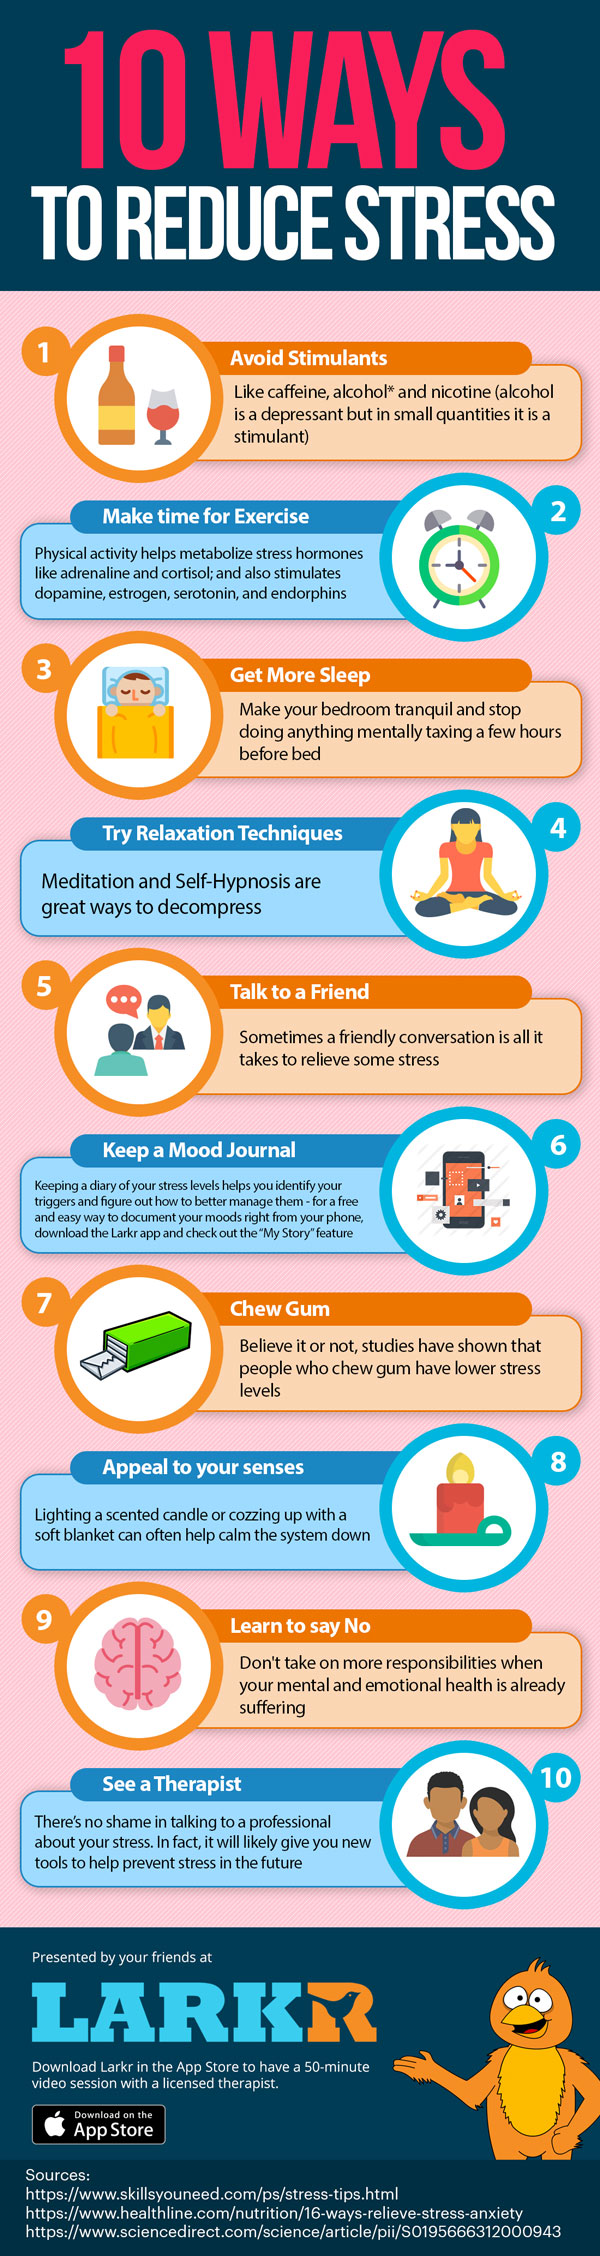 10-ways-to-reduce-stress-infographic-best-infographics